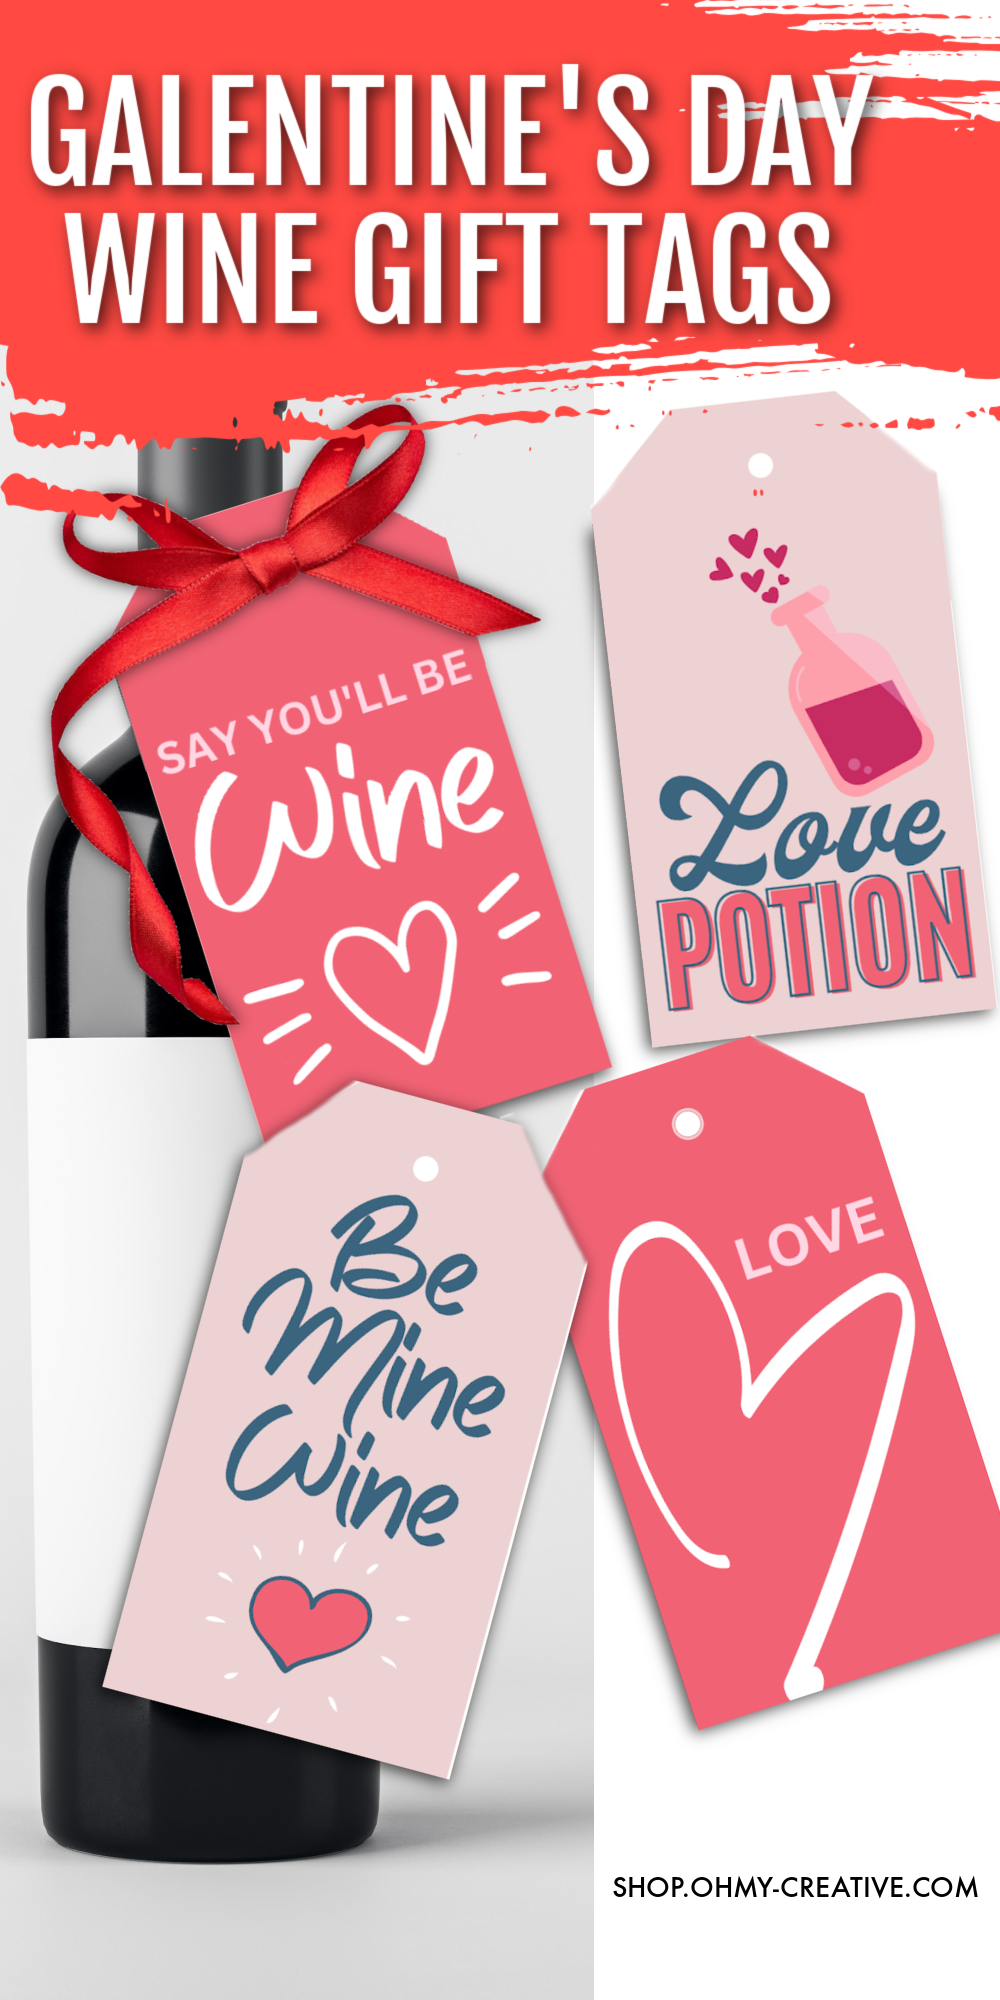 printable Galentine's Day gift tags for your gal girlfriends.